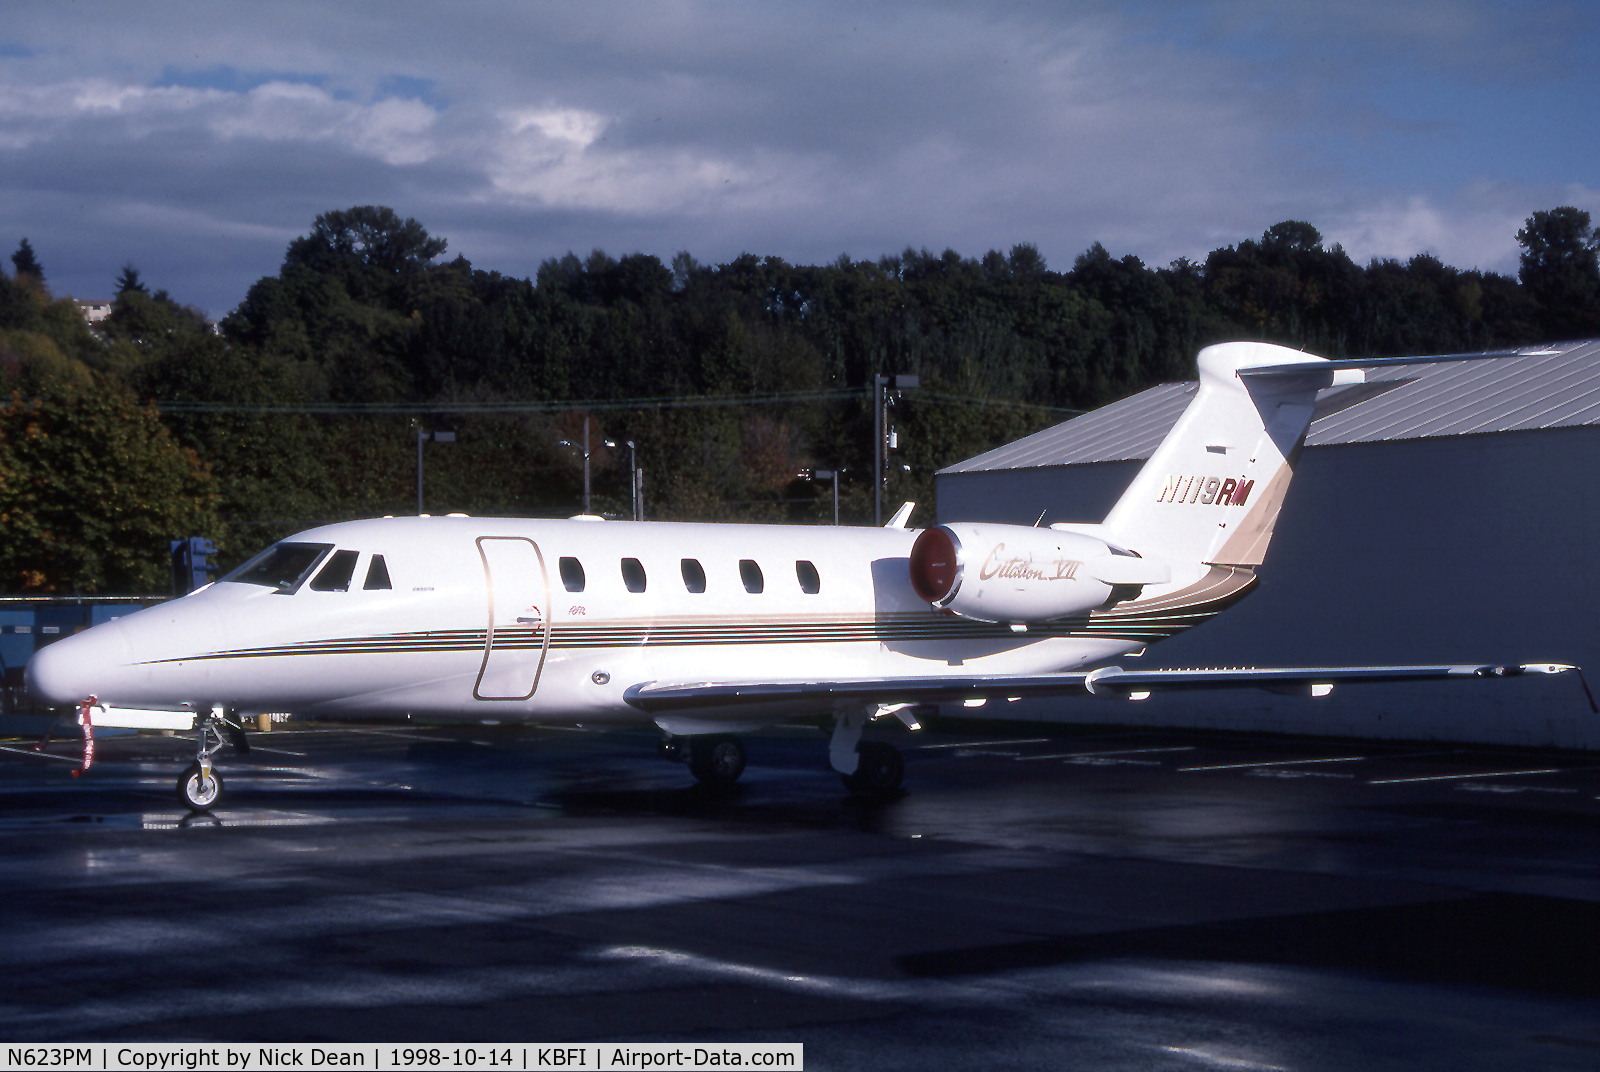 N623PM, 1992 Cessna 650 C/N 650-7018, KBFI (Seen here as N119RM and currently registered N623PM as posted)